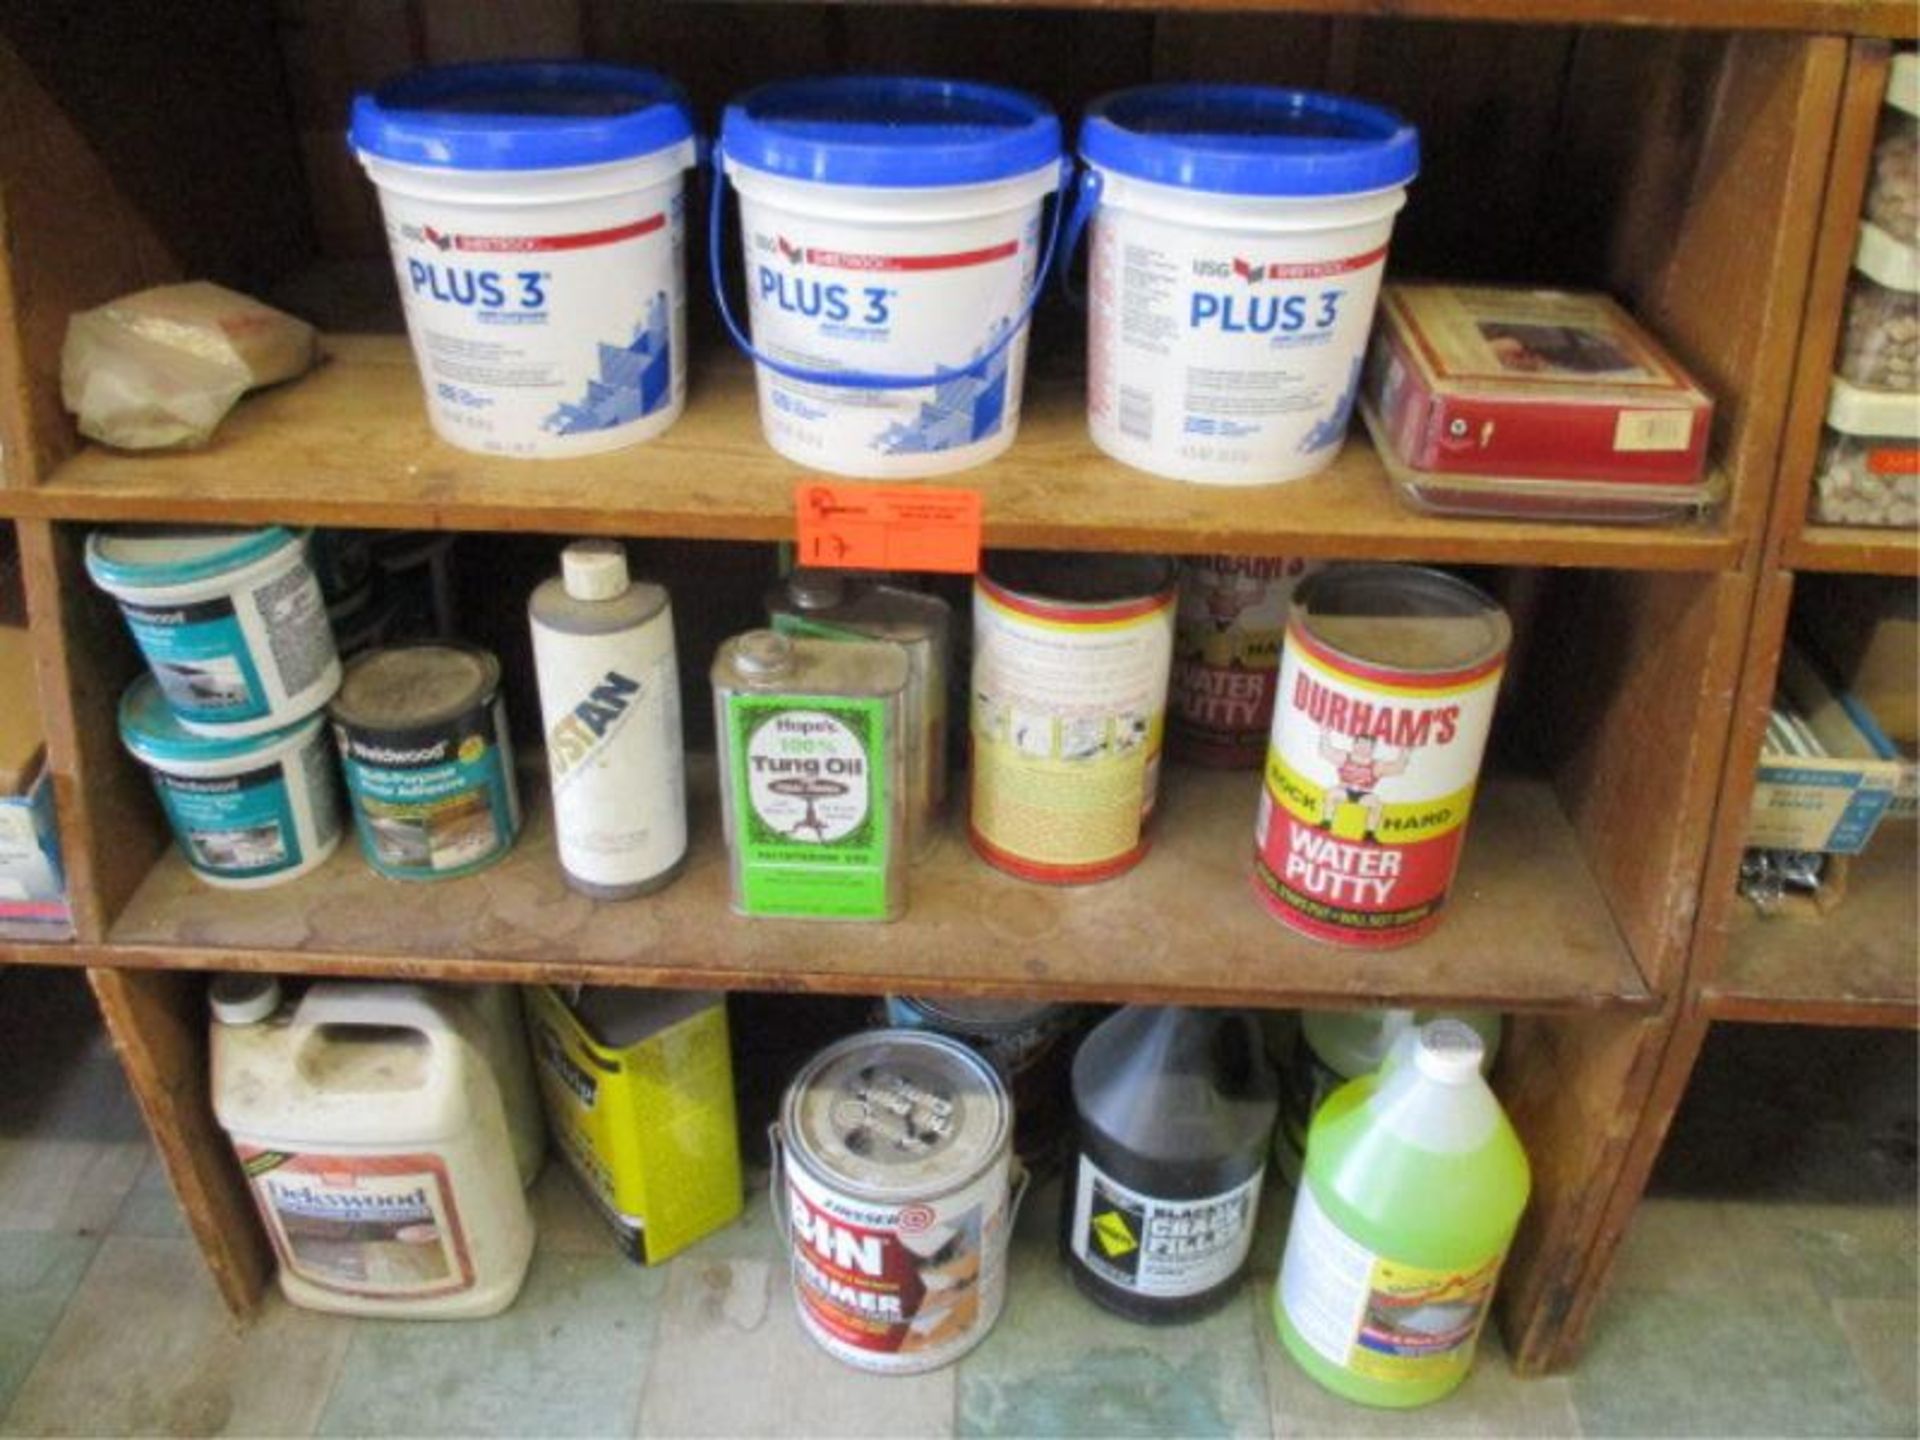 3 Shelves w/ Joint Compound, Water Putty, Tung Oil, Floor Adhesive, Deck Cleaner, Zip-Strip, B-I-N